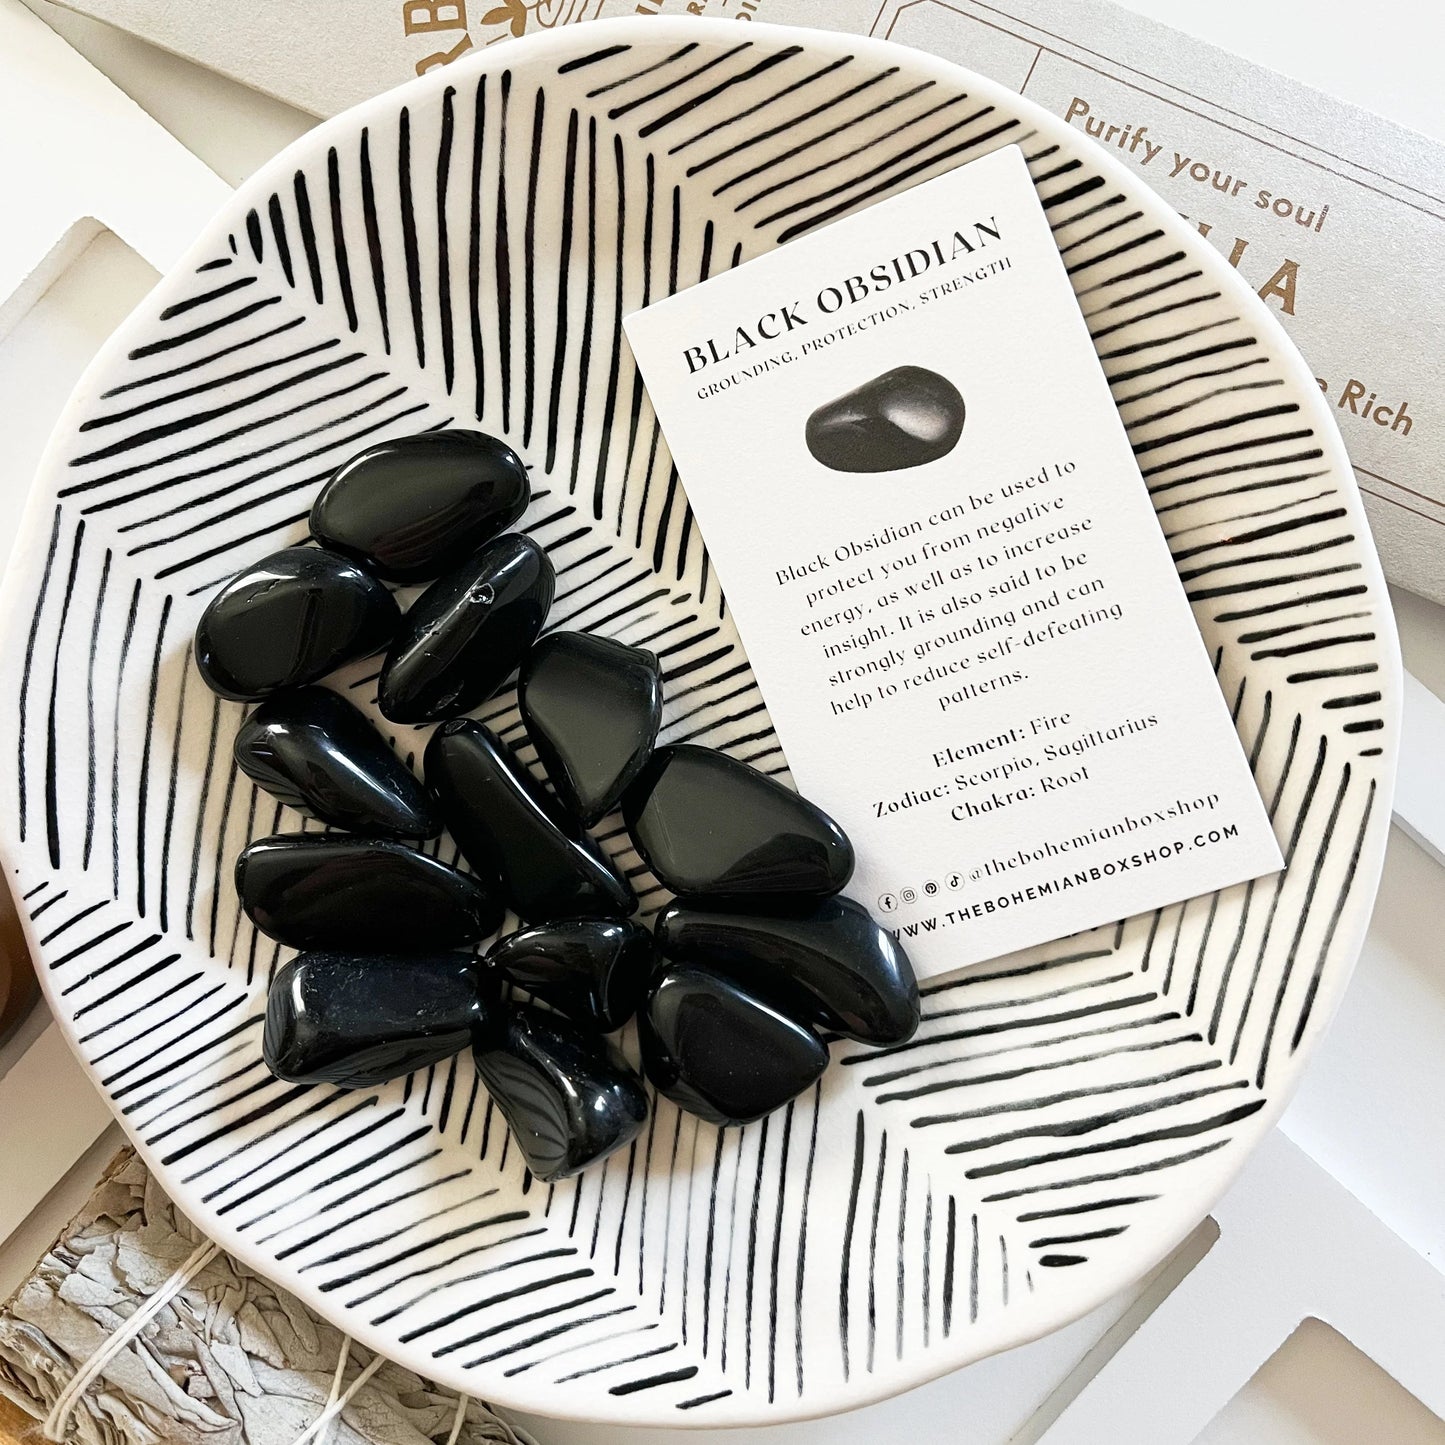 Black Obsidian Tumbled Stone with complementary keepsake information card